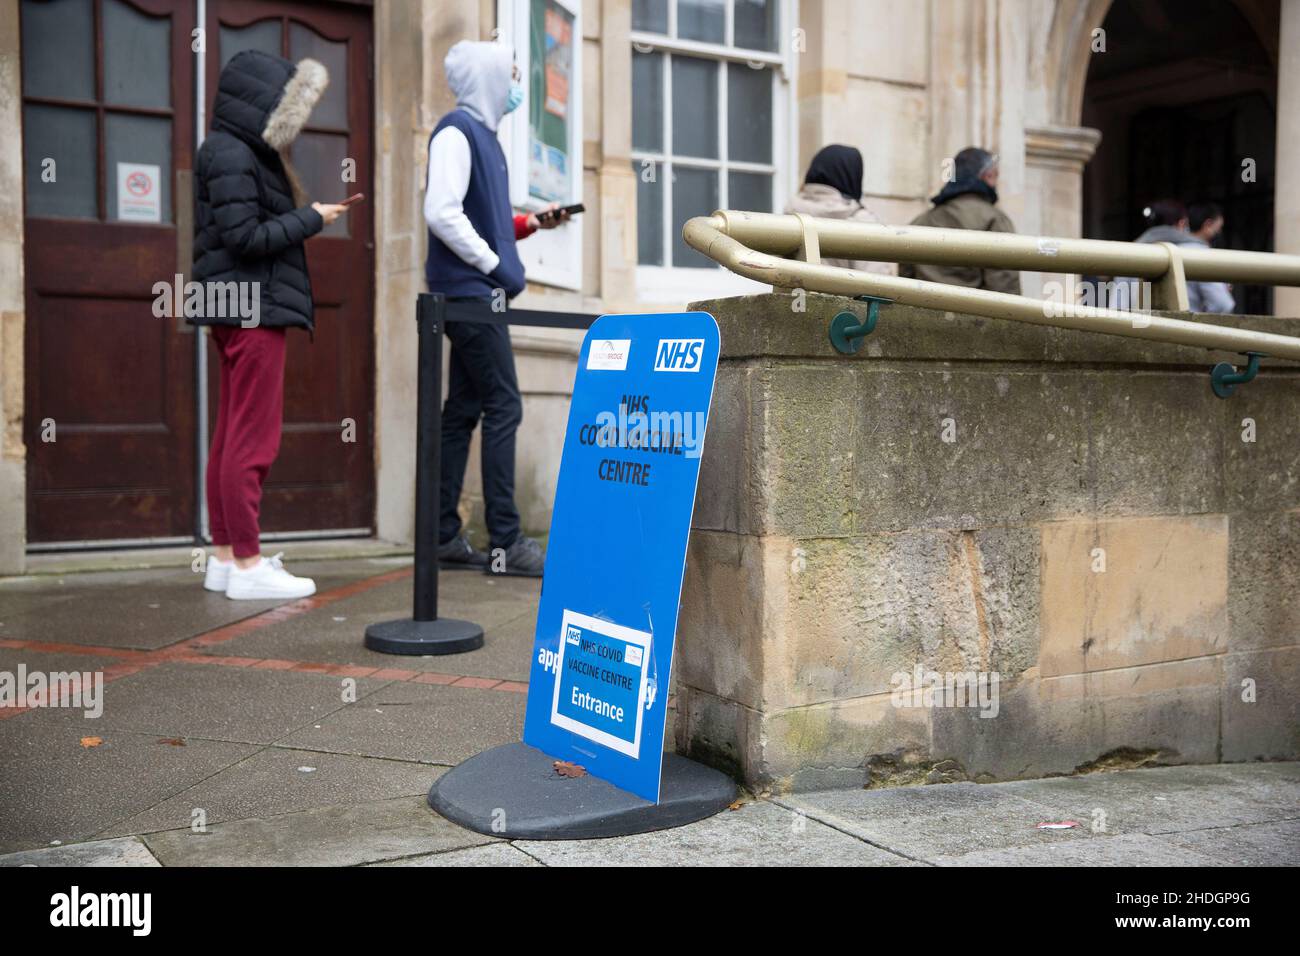 Members of the staff check people queuing outside a vaccination centre on Christmas Day in London as the Omicron variant reportedly spreads. Stock Photo